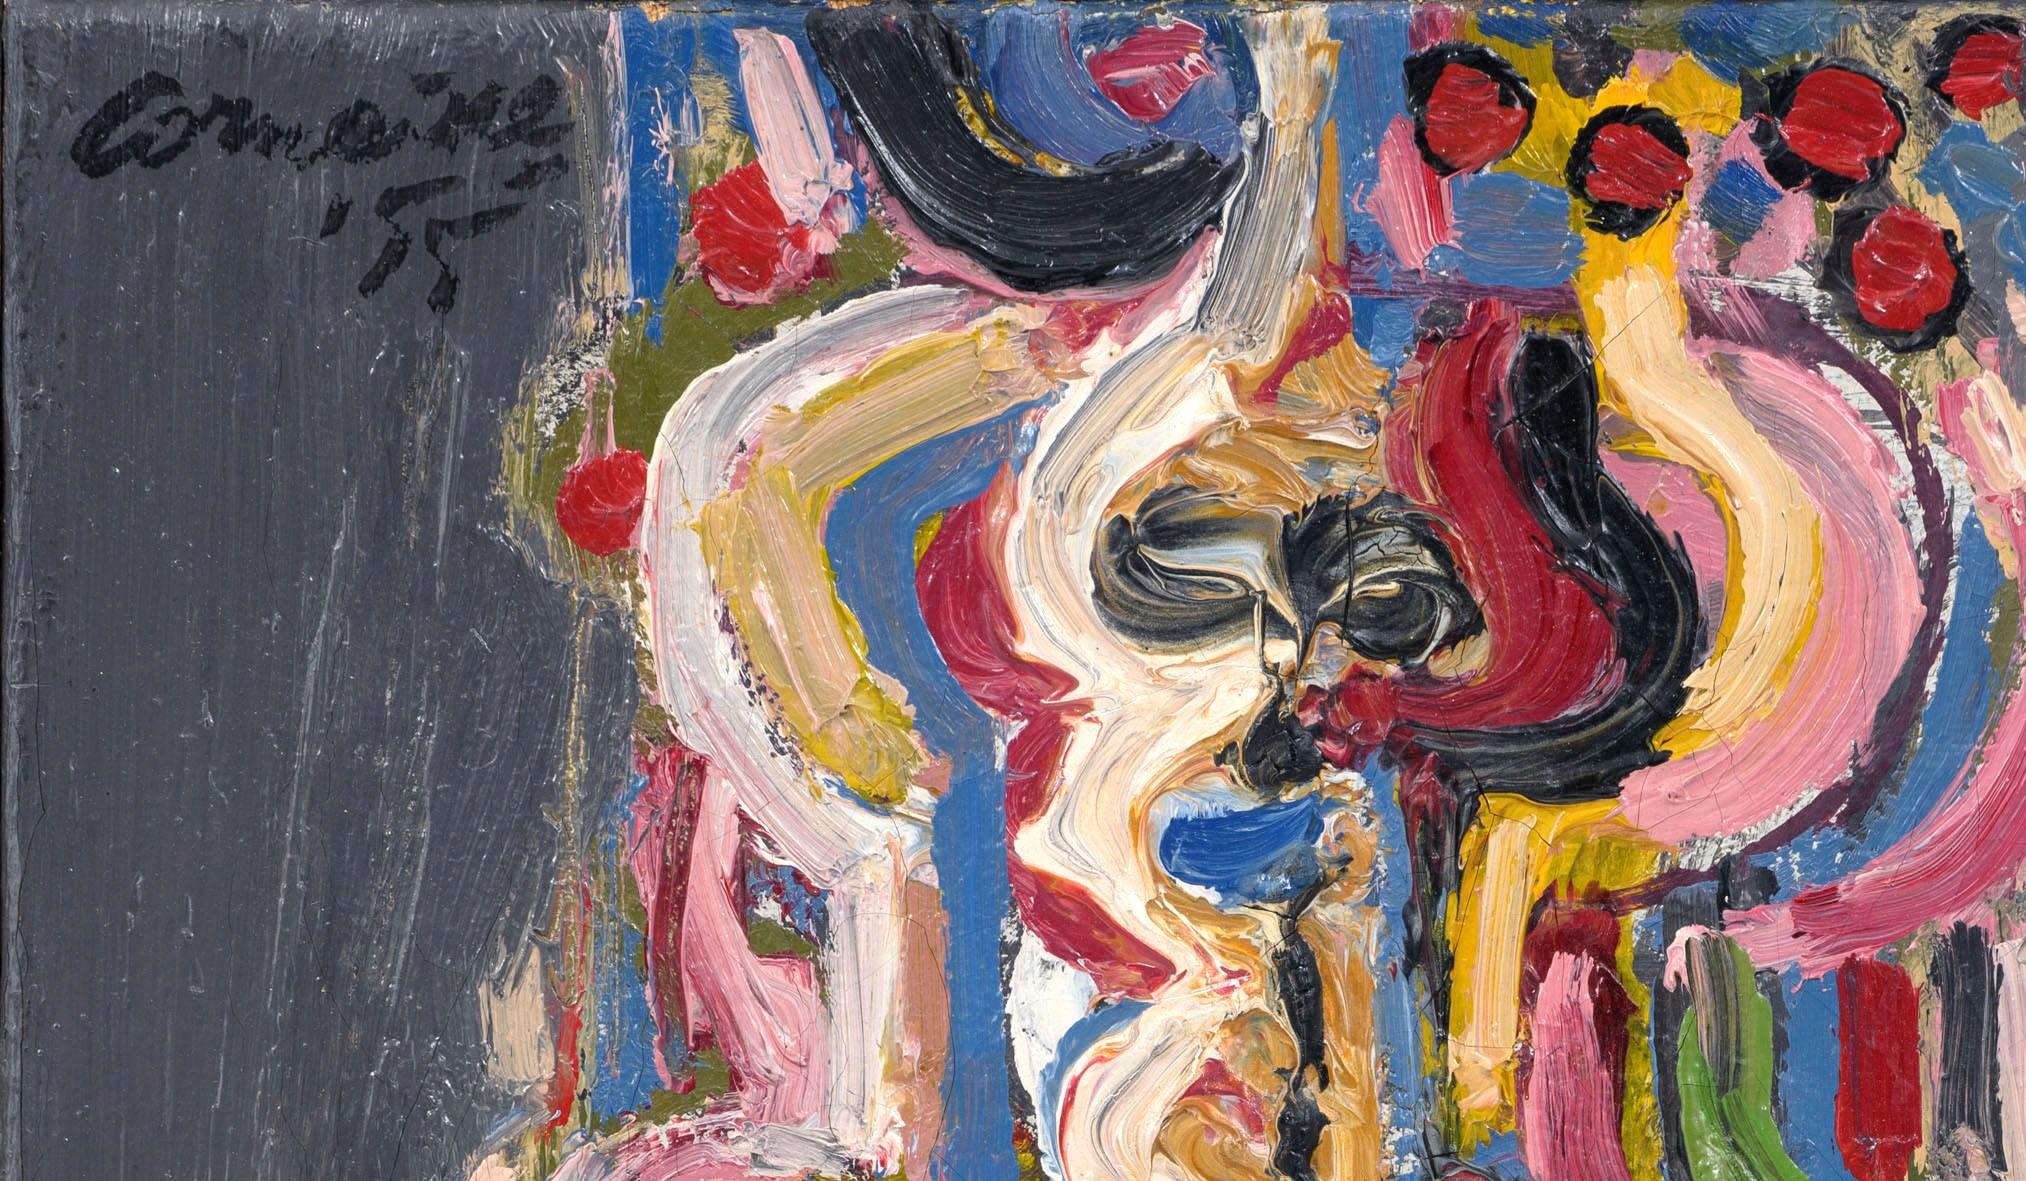 Corneille
Corps Nu et Rose (Nude and Pink Body)
1955
oil on canvas
32.2 x 24.4 cm
Signed verso

Desctiption:
Guillaume Cornelius Beverloo, better known by his French pseudonym Corneille, was a Dutch painter and graphic artist best known for his